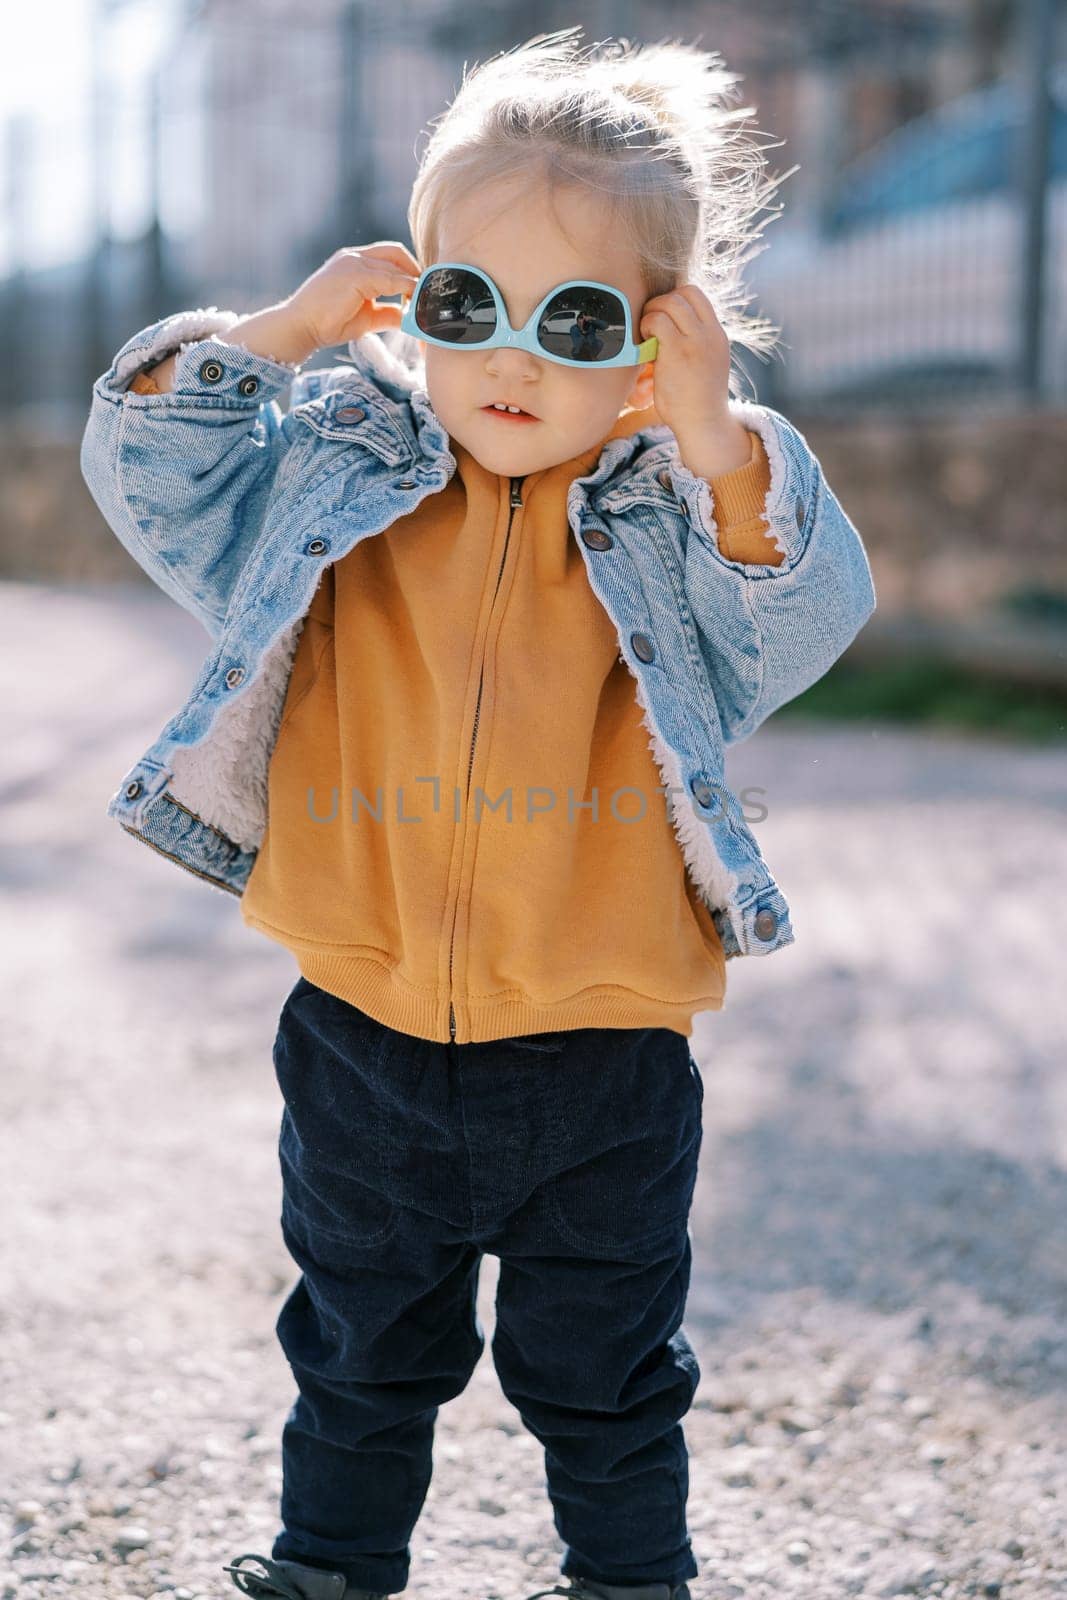 Little girl trying on sunglasses upside down. High quality photo